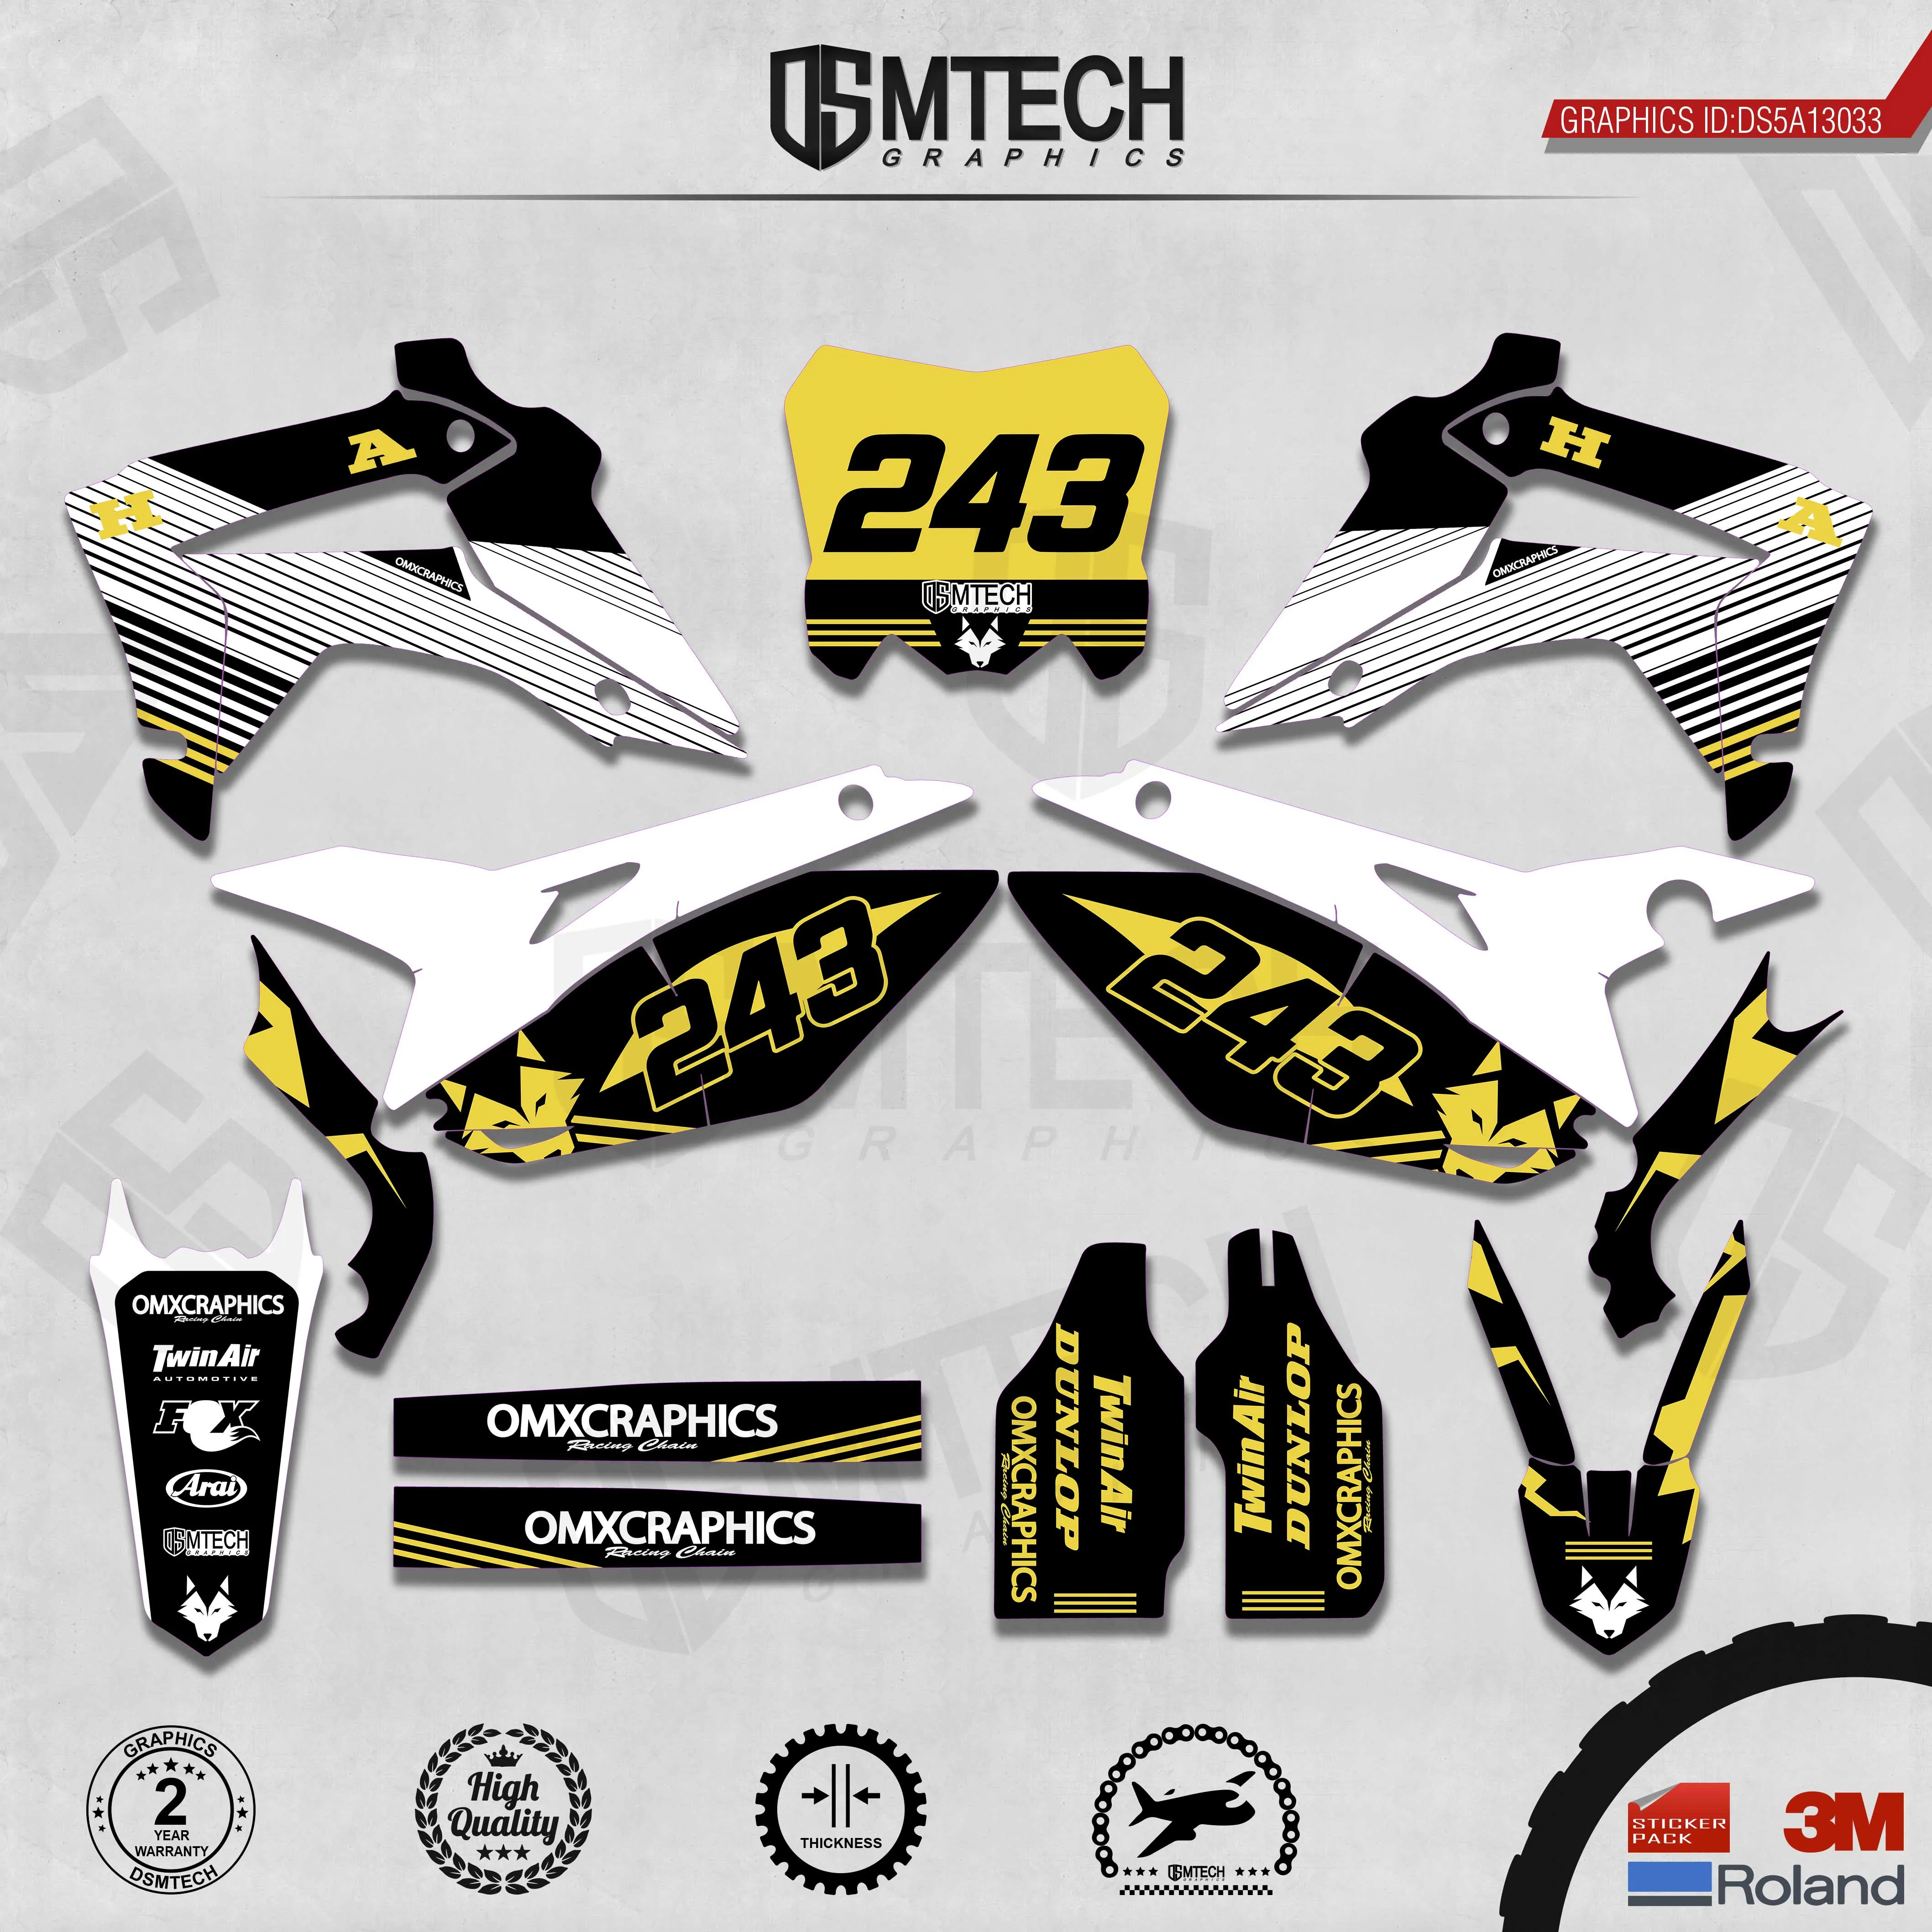 DSMTECH Customized Team Graphics Backgrounds Decals 3M Custom Stickers For 2014-2017CRF250R 2013-2016CRF450R 033